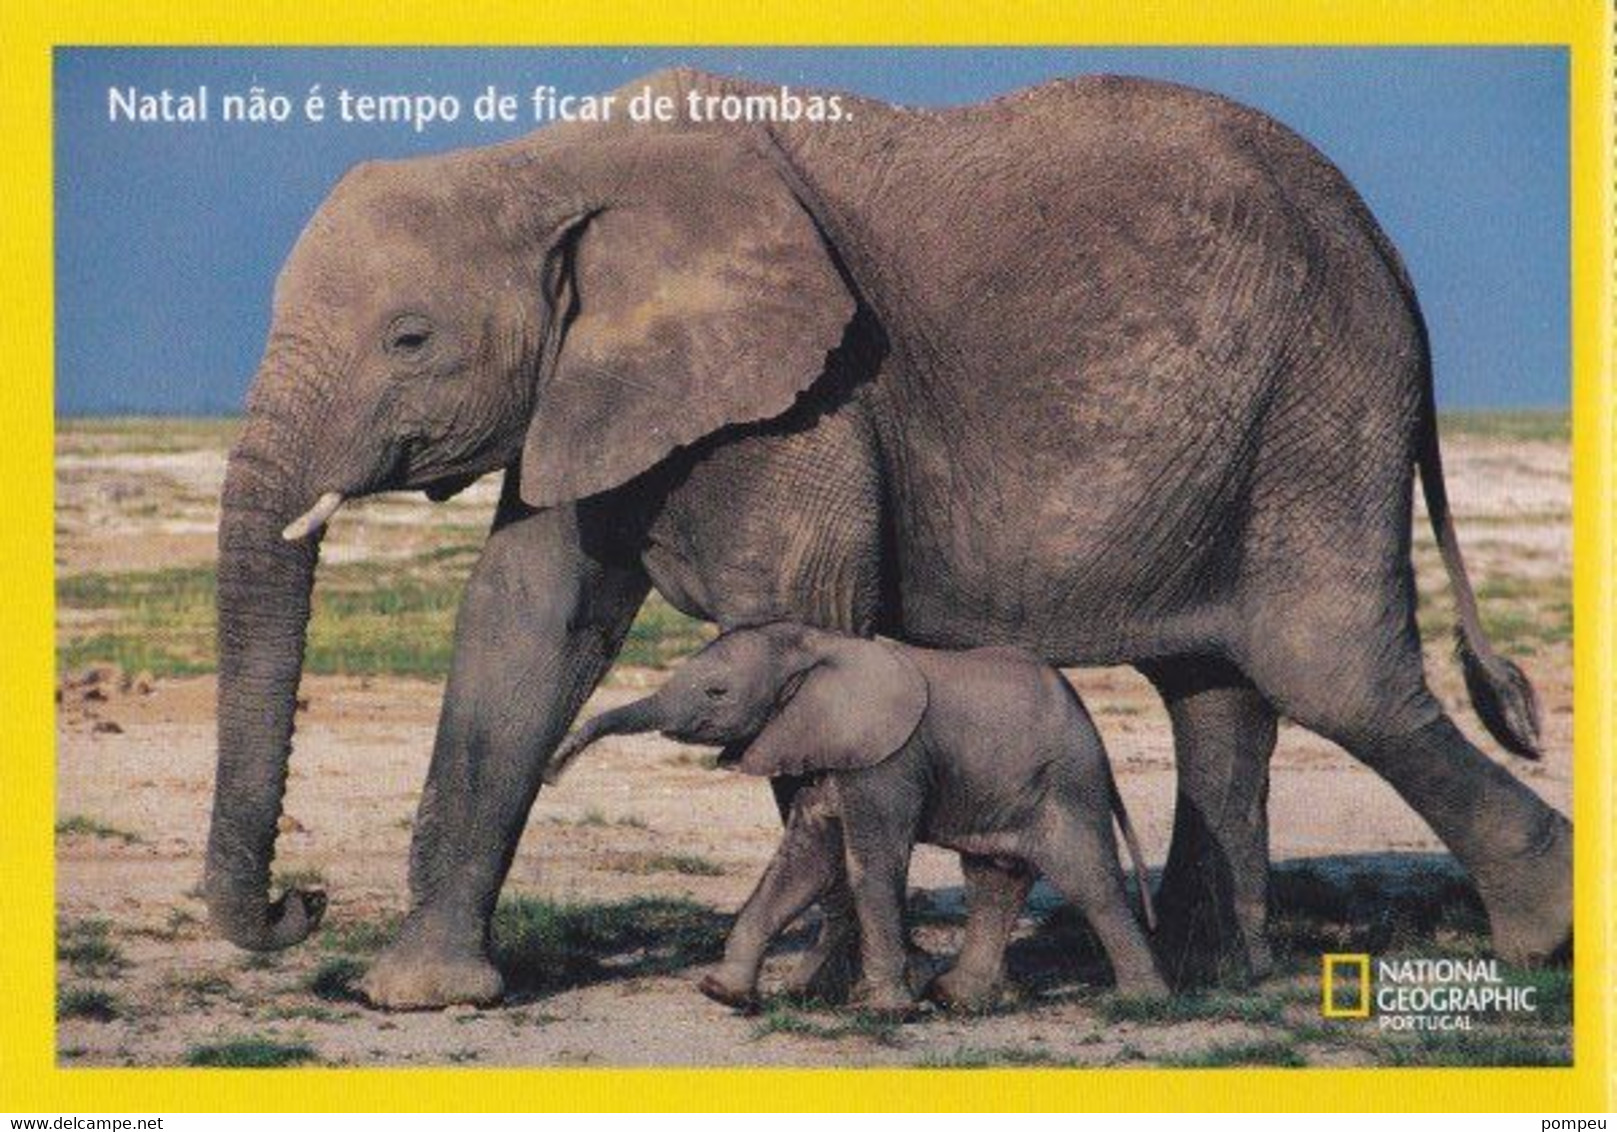 QO - Lote 3 Cartes - NATIONAL GEOGRAPHIC - Portugal:    (neuf) - 5 - 99 Postcards